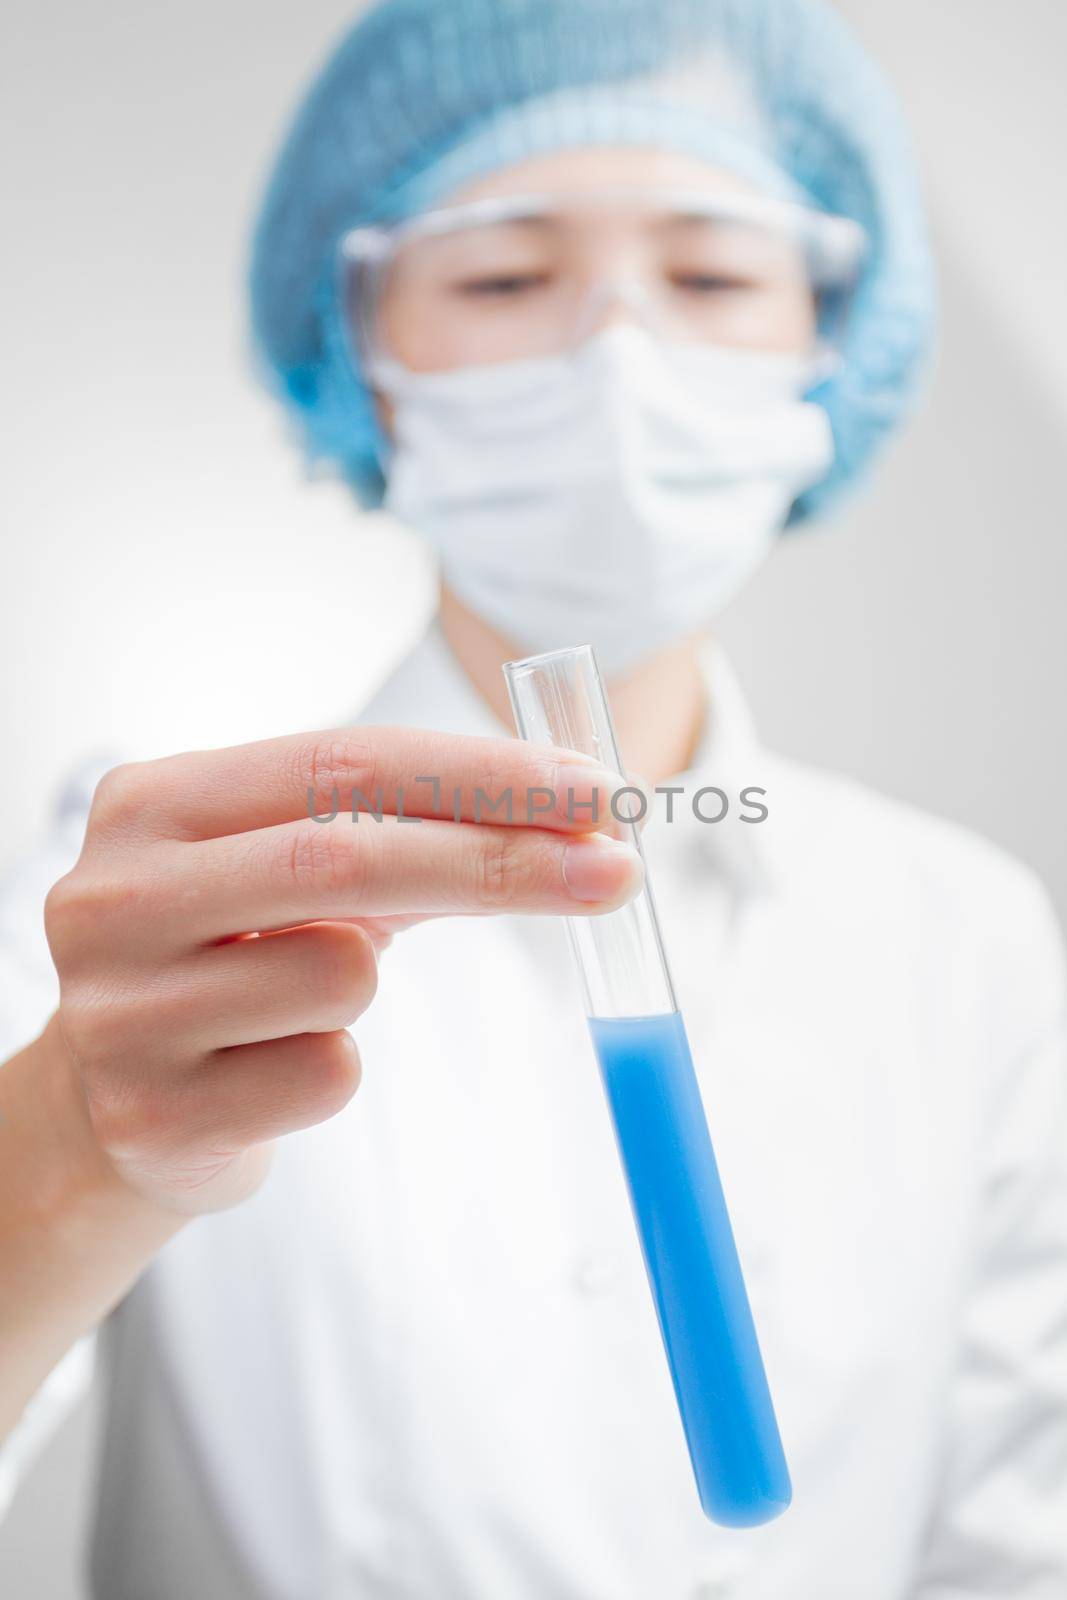 Lab technician holding a test tube close up by alexAleksei